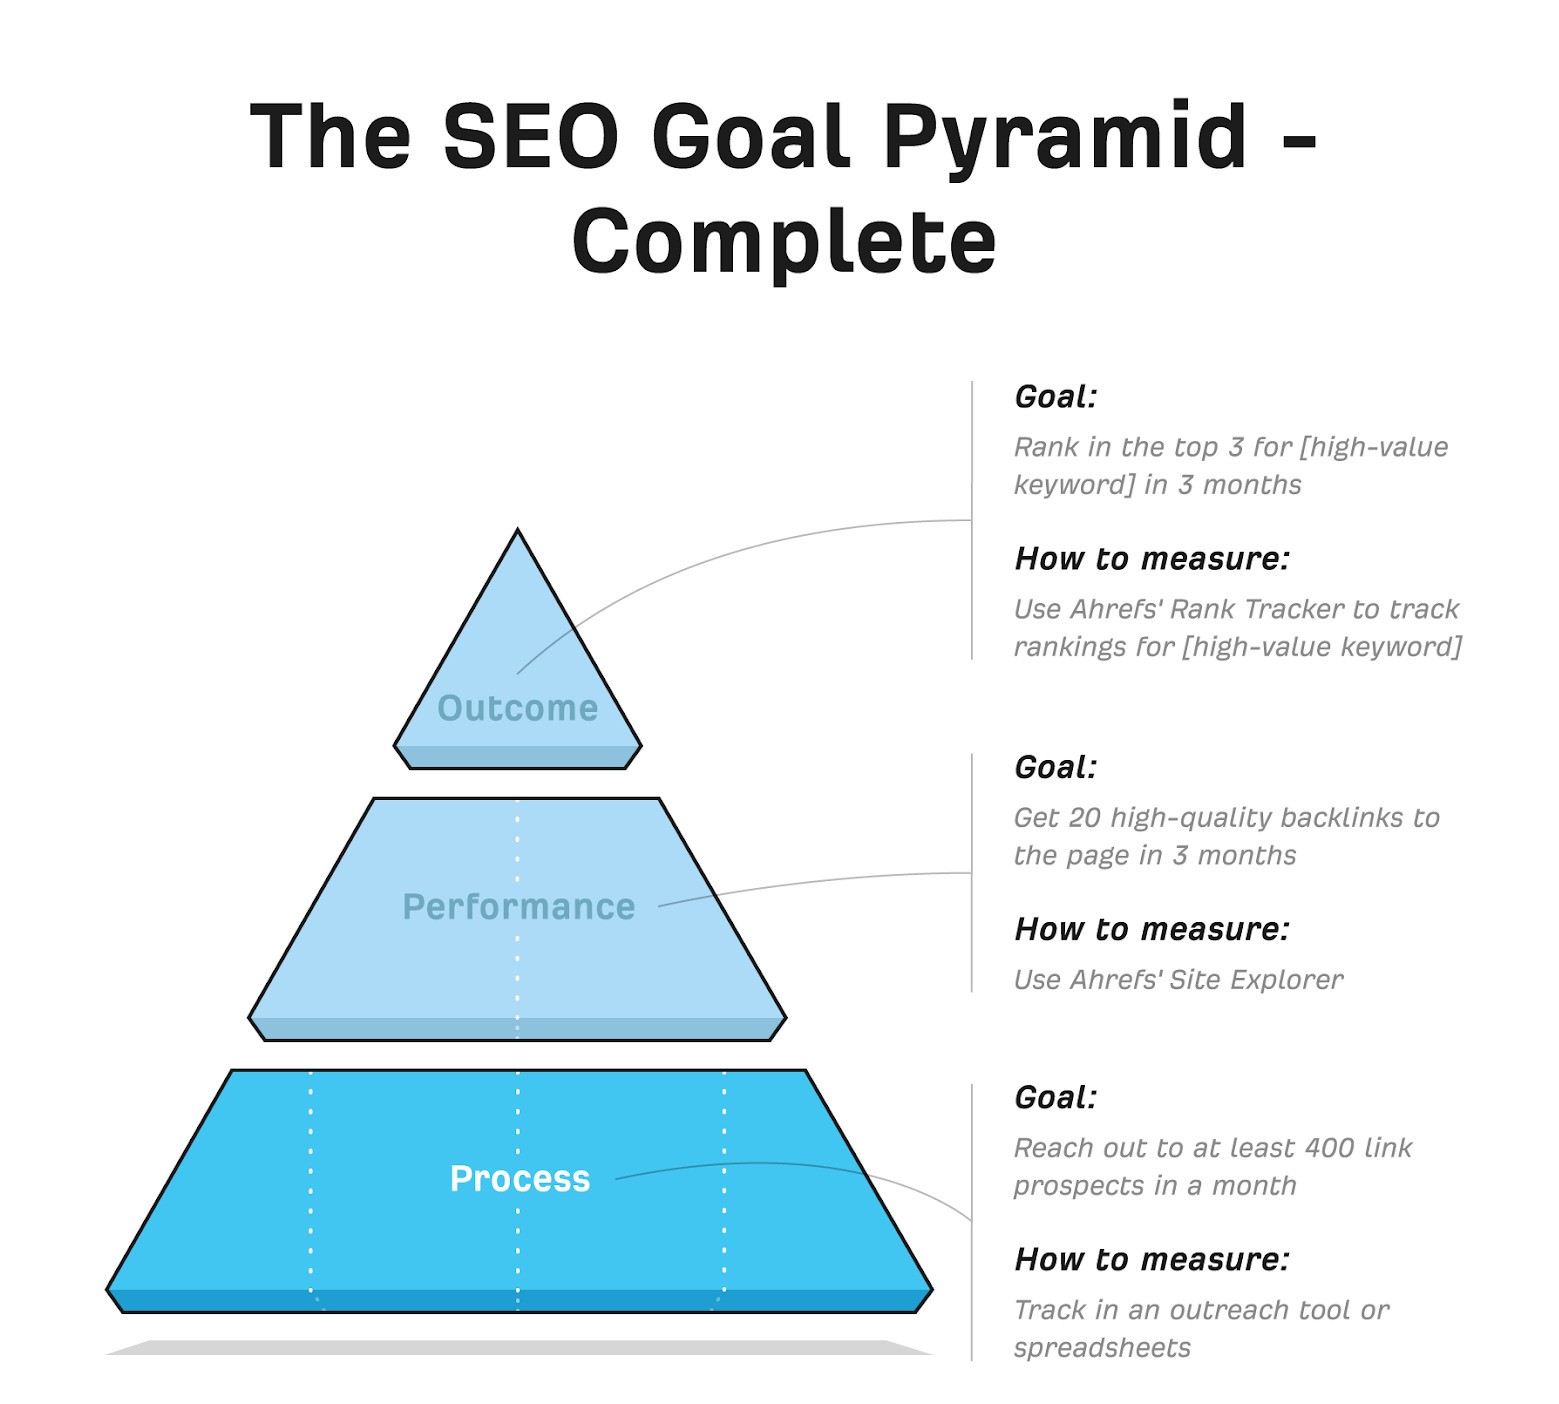 Seo goal pyramid-complete goals in 3 different tiers